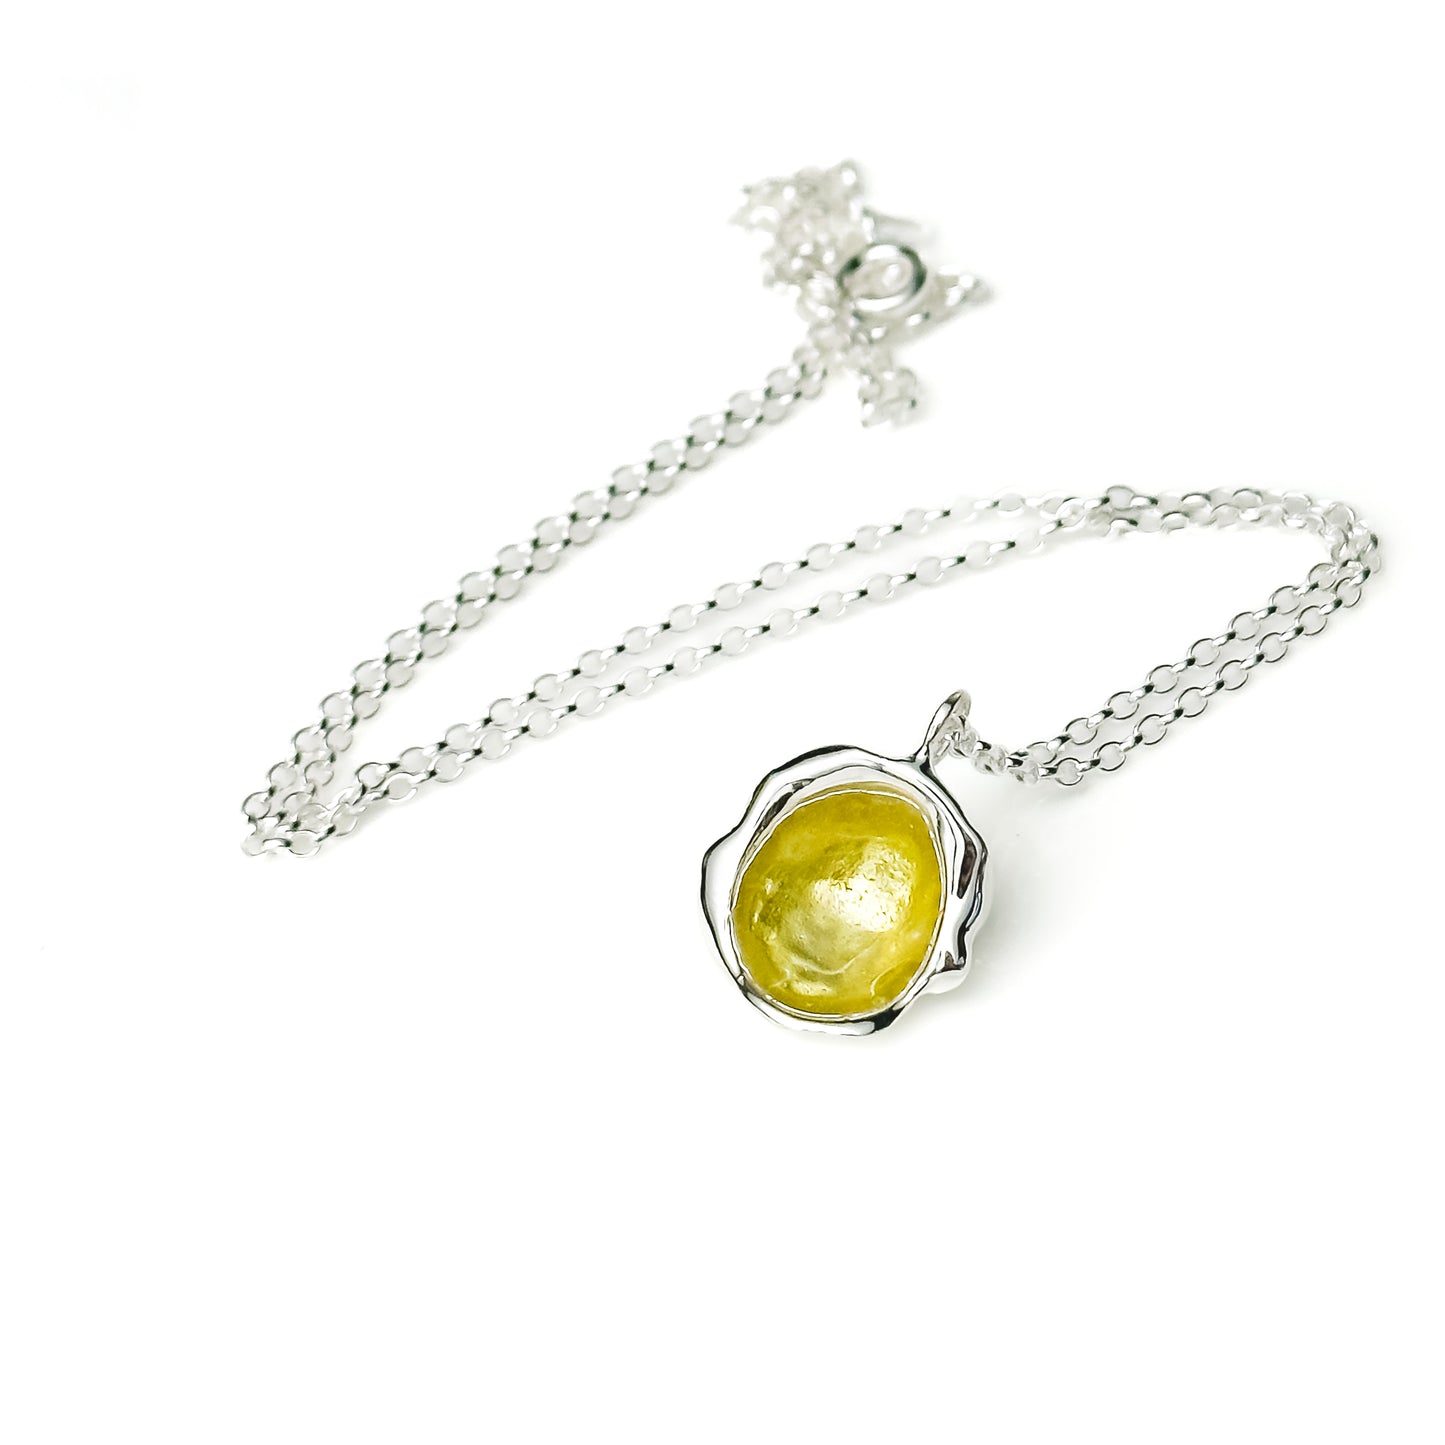 'Gorse' Yellow Sterling Silver Droplet Necklace